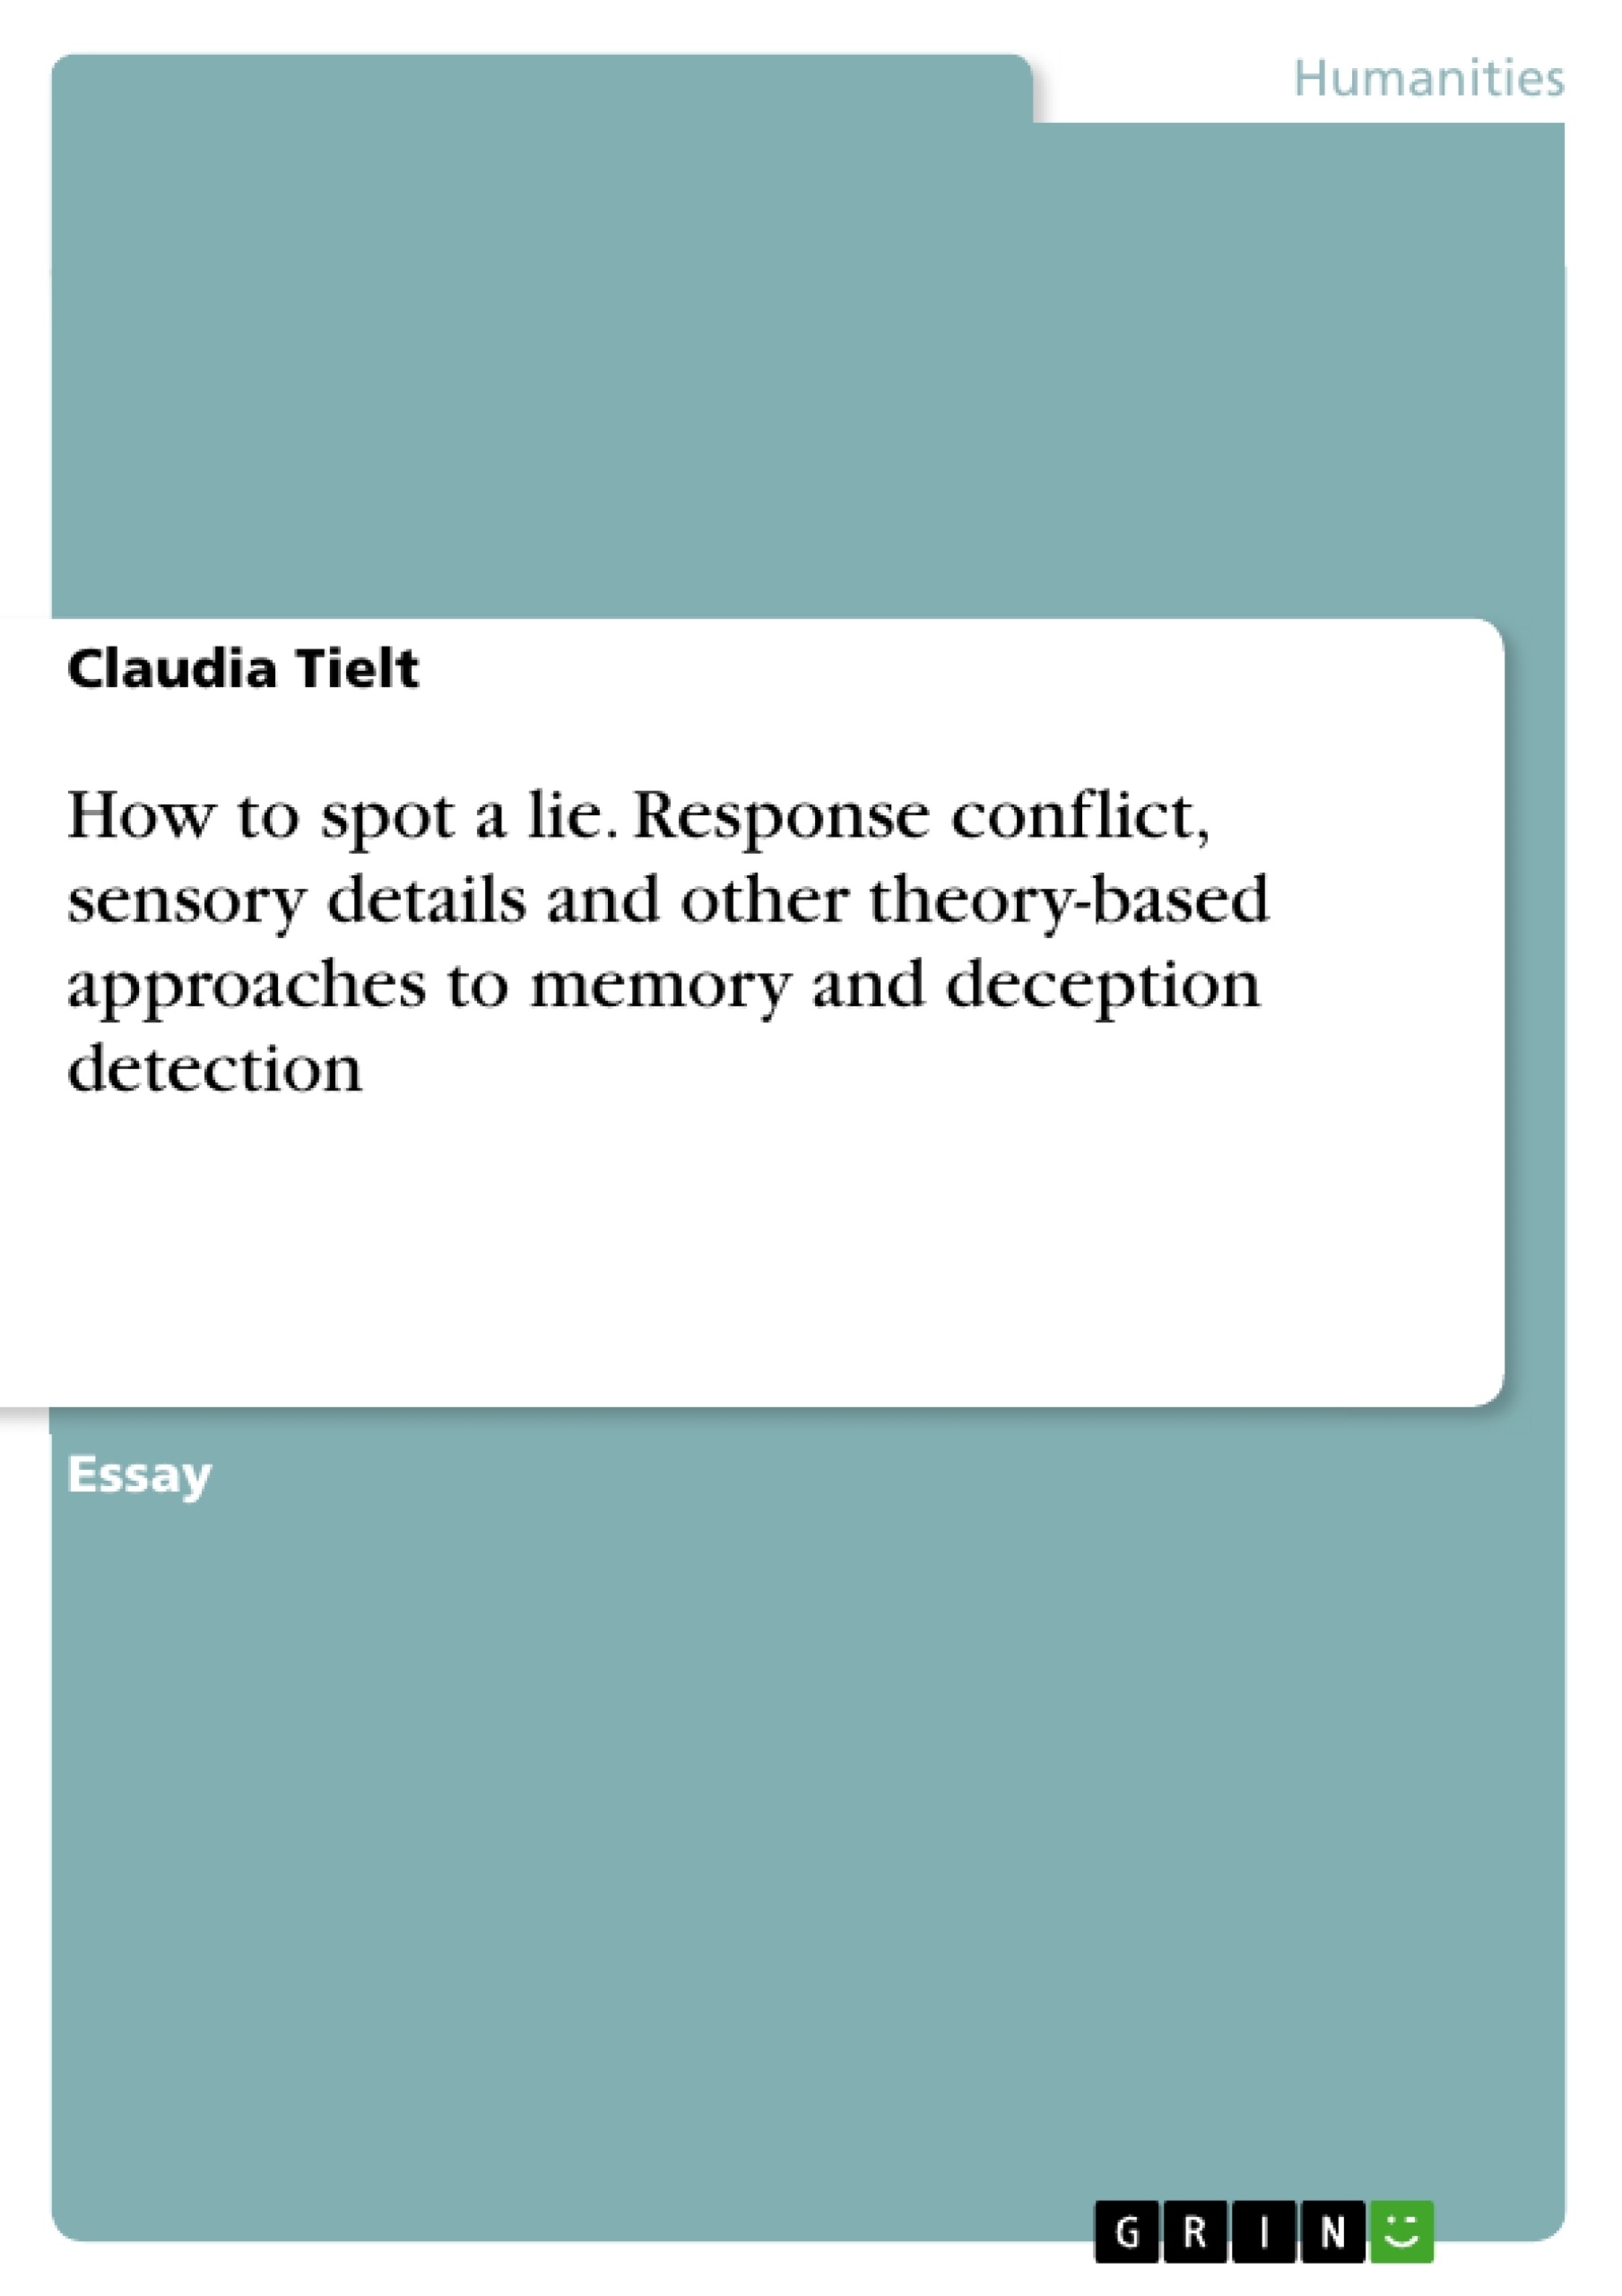 Titre: How to spot a lie. Response conflict, sensory details and other theory-based approaches to memory and deception detection